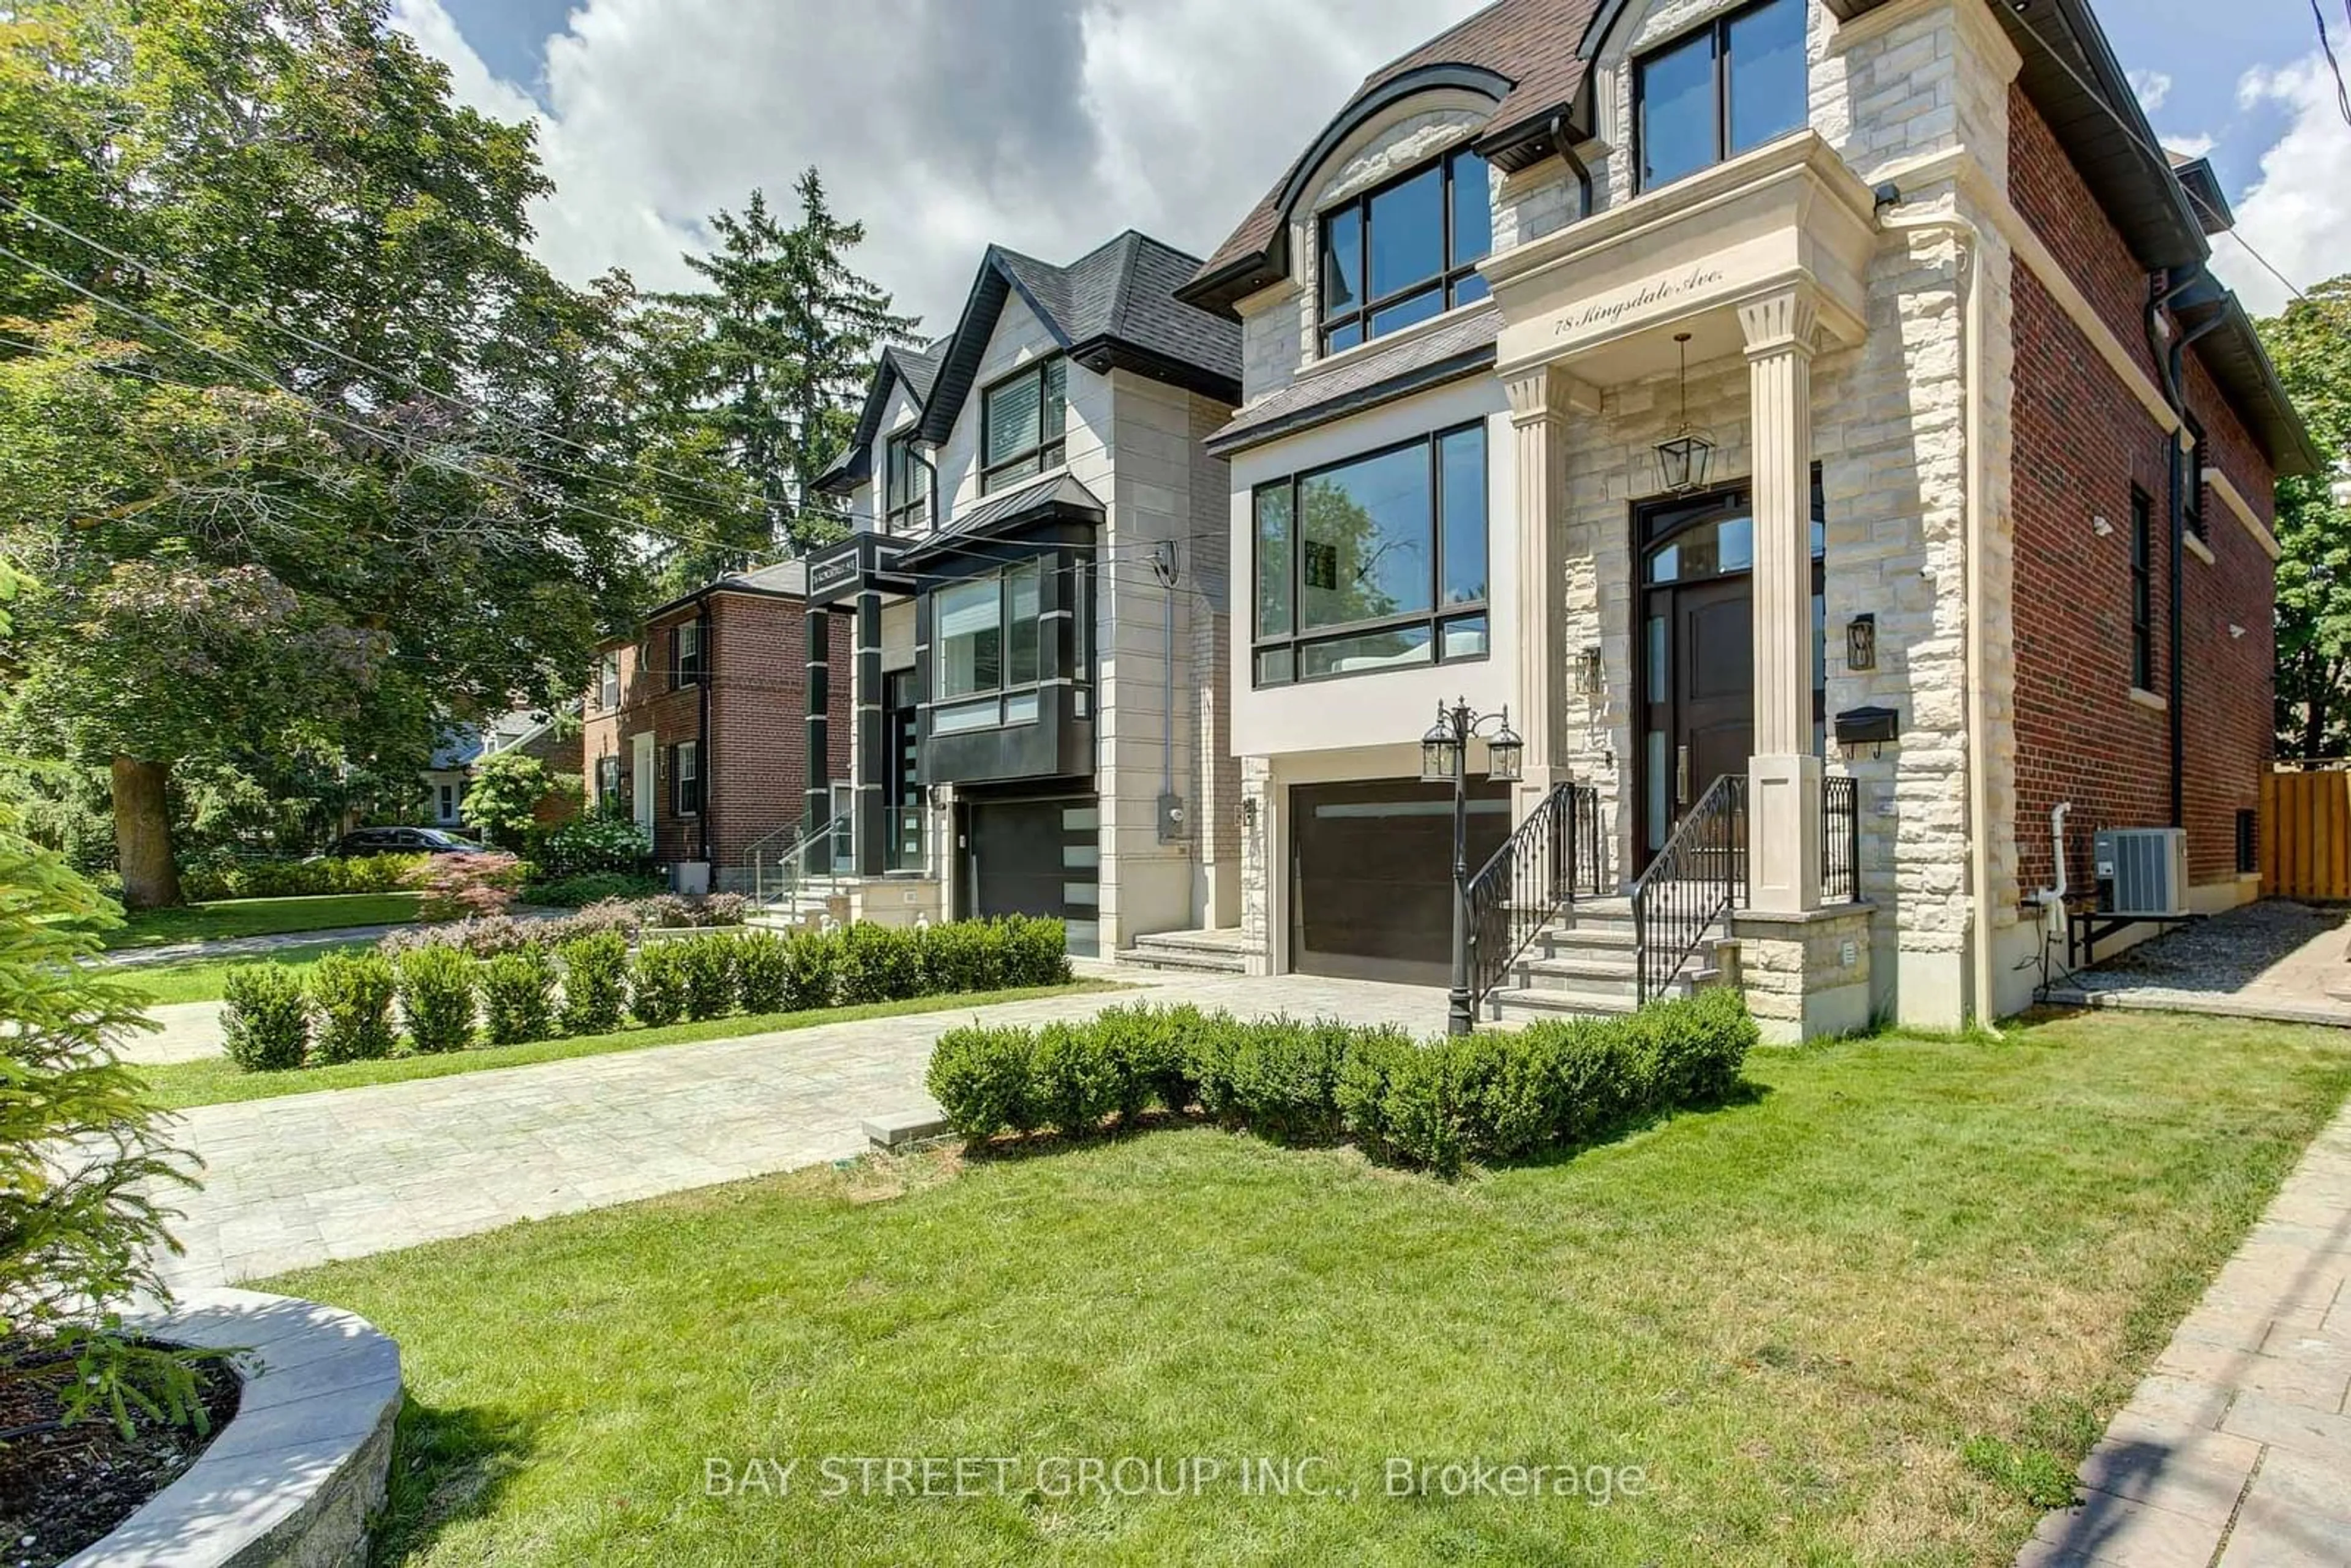 Home with brick exterior material for 78 Kingsdale Ave, Toronto Ontario M2N 3W4